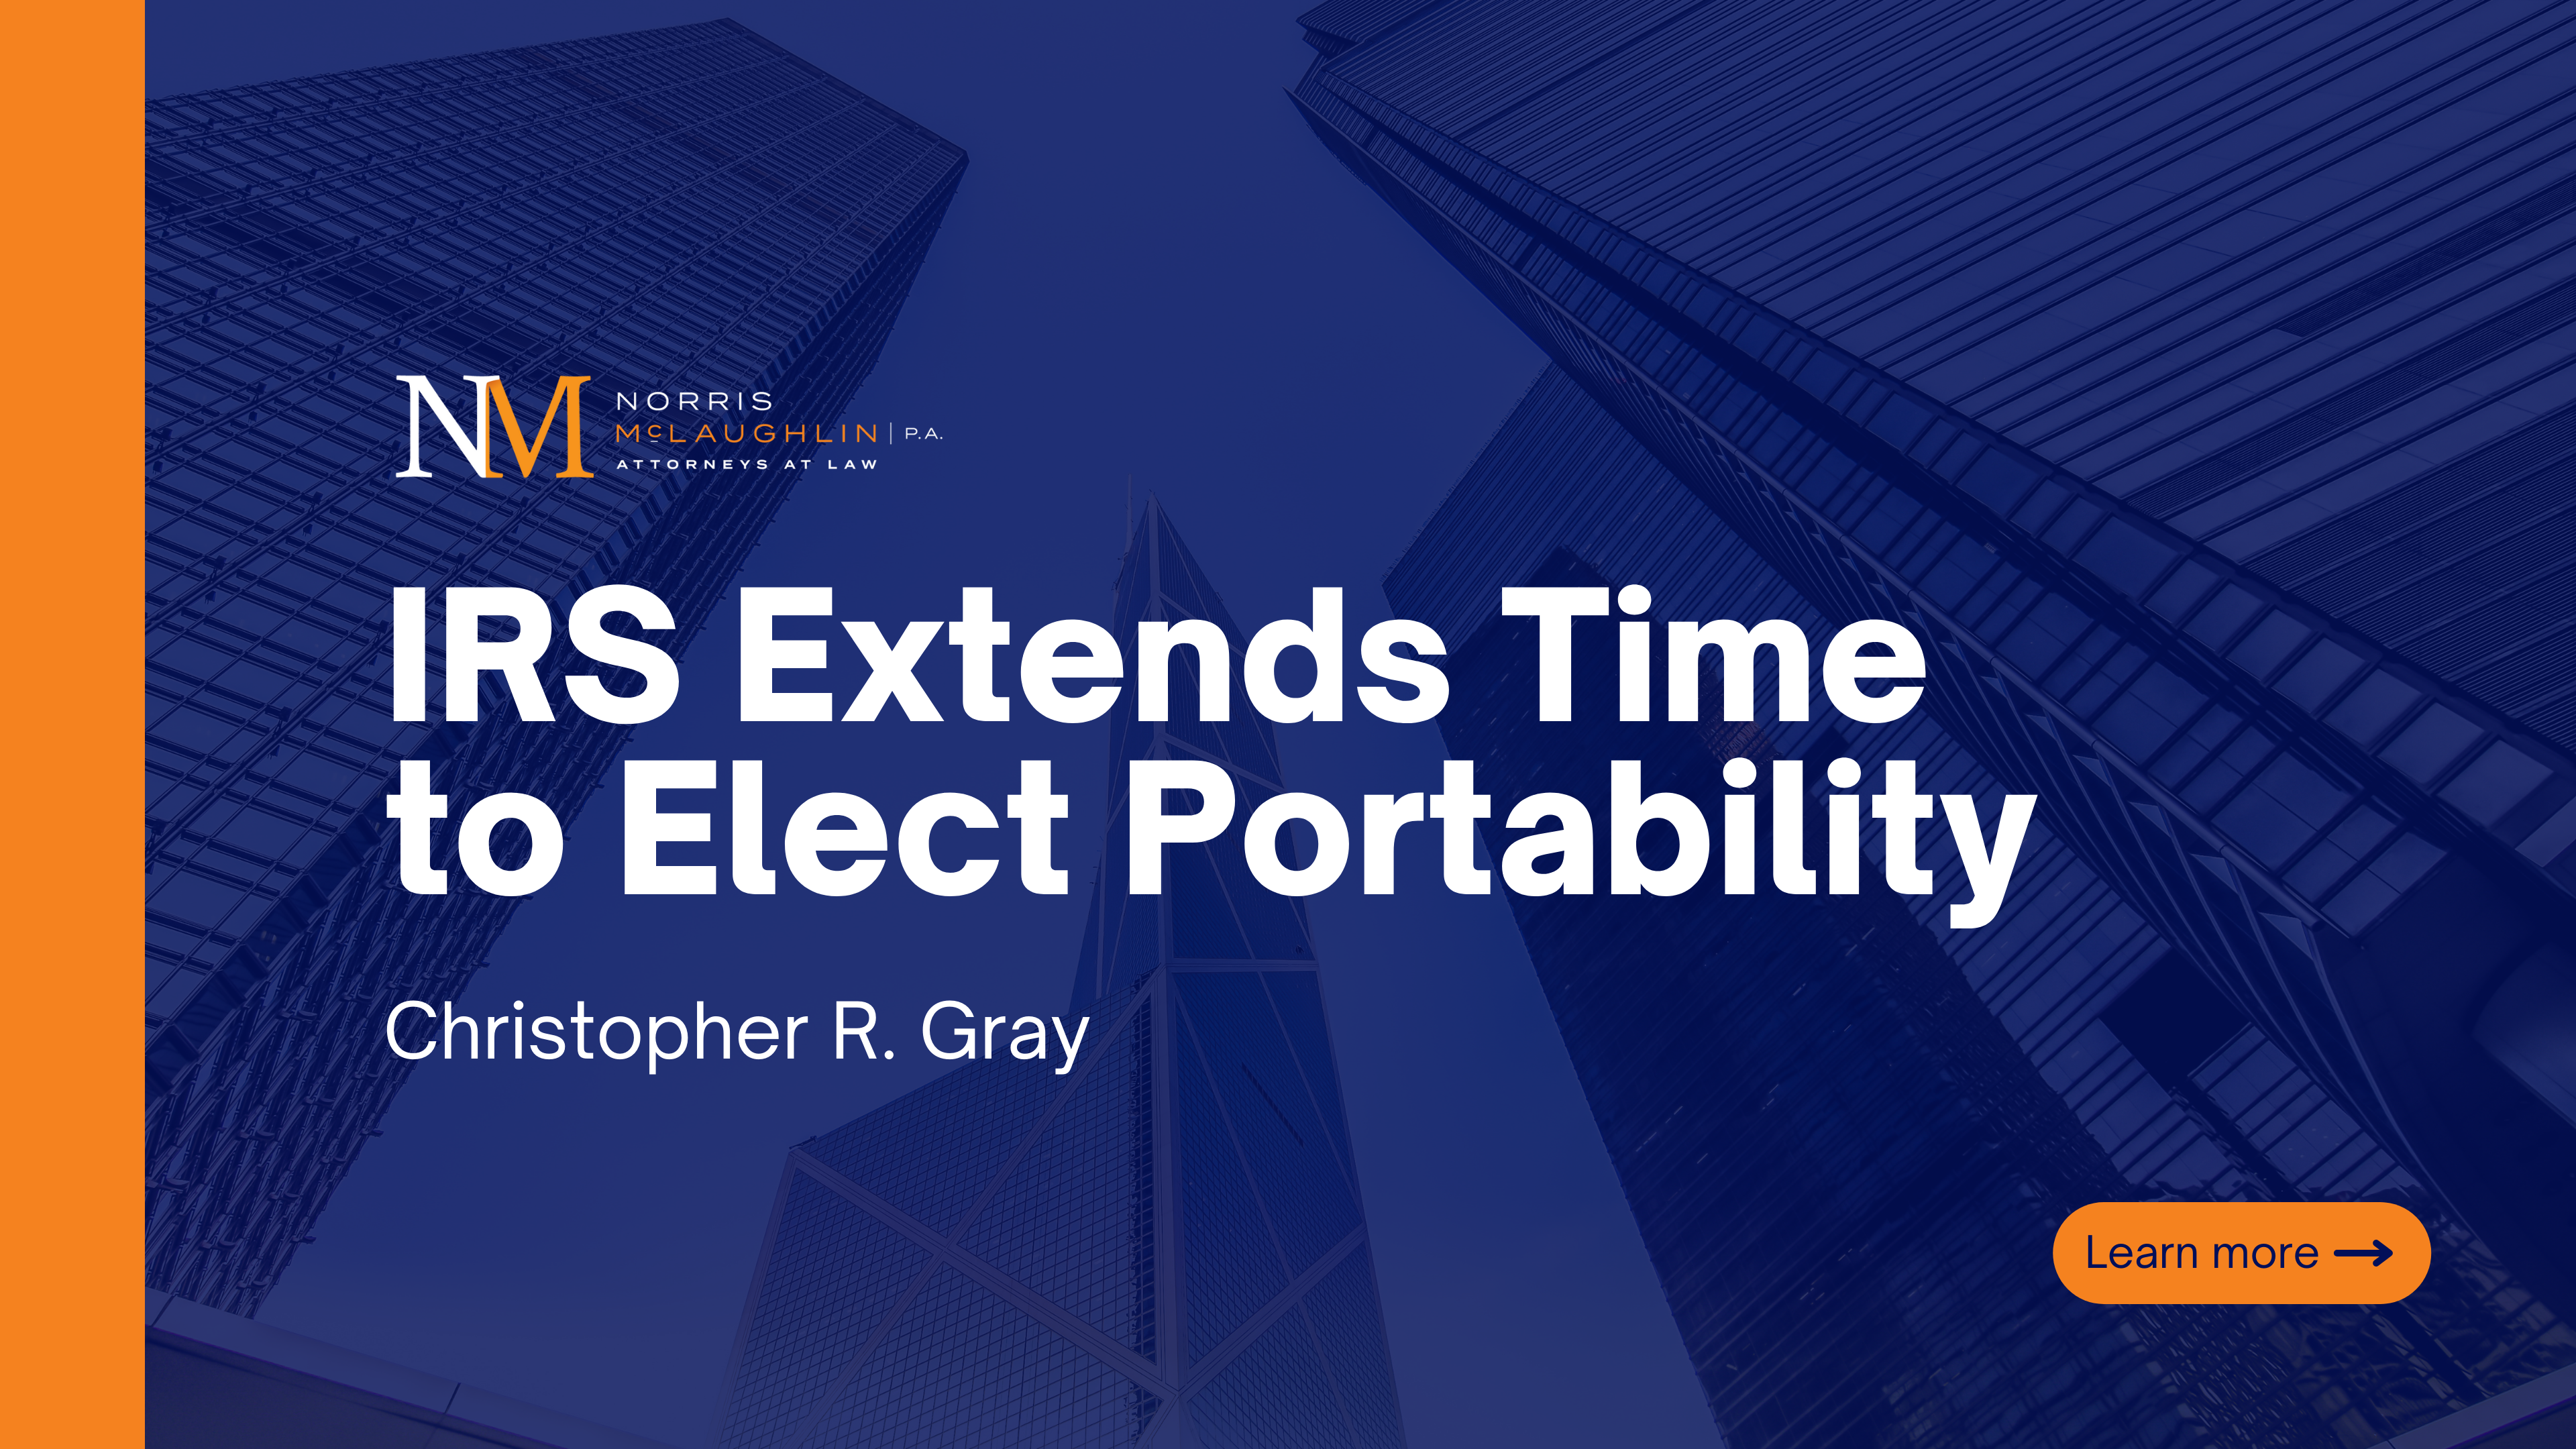 IRS Extends Time to Elect Portability